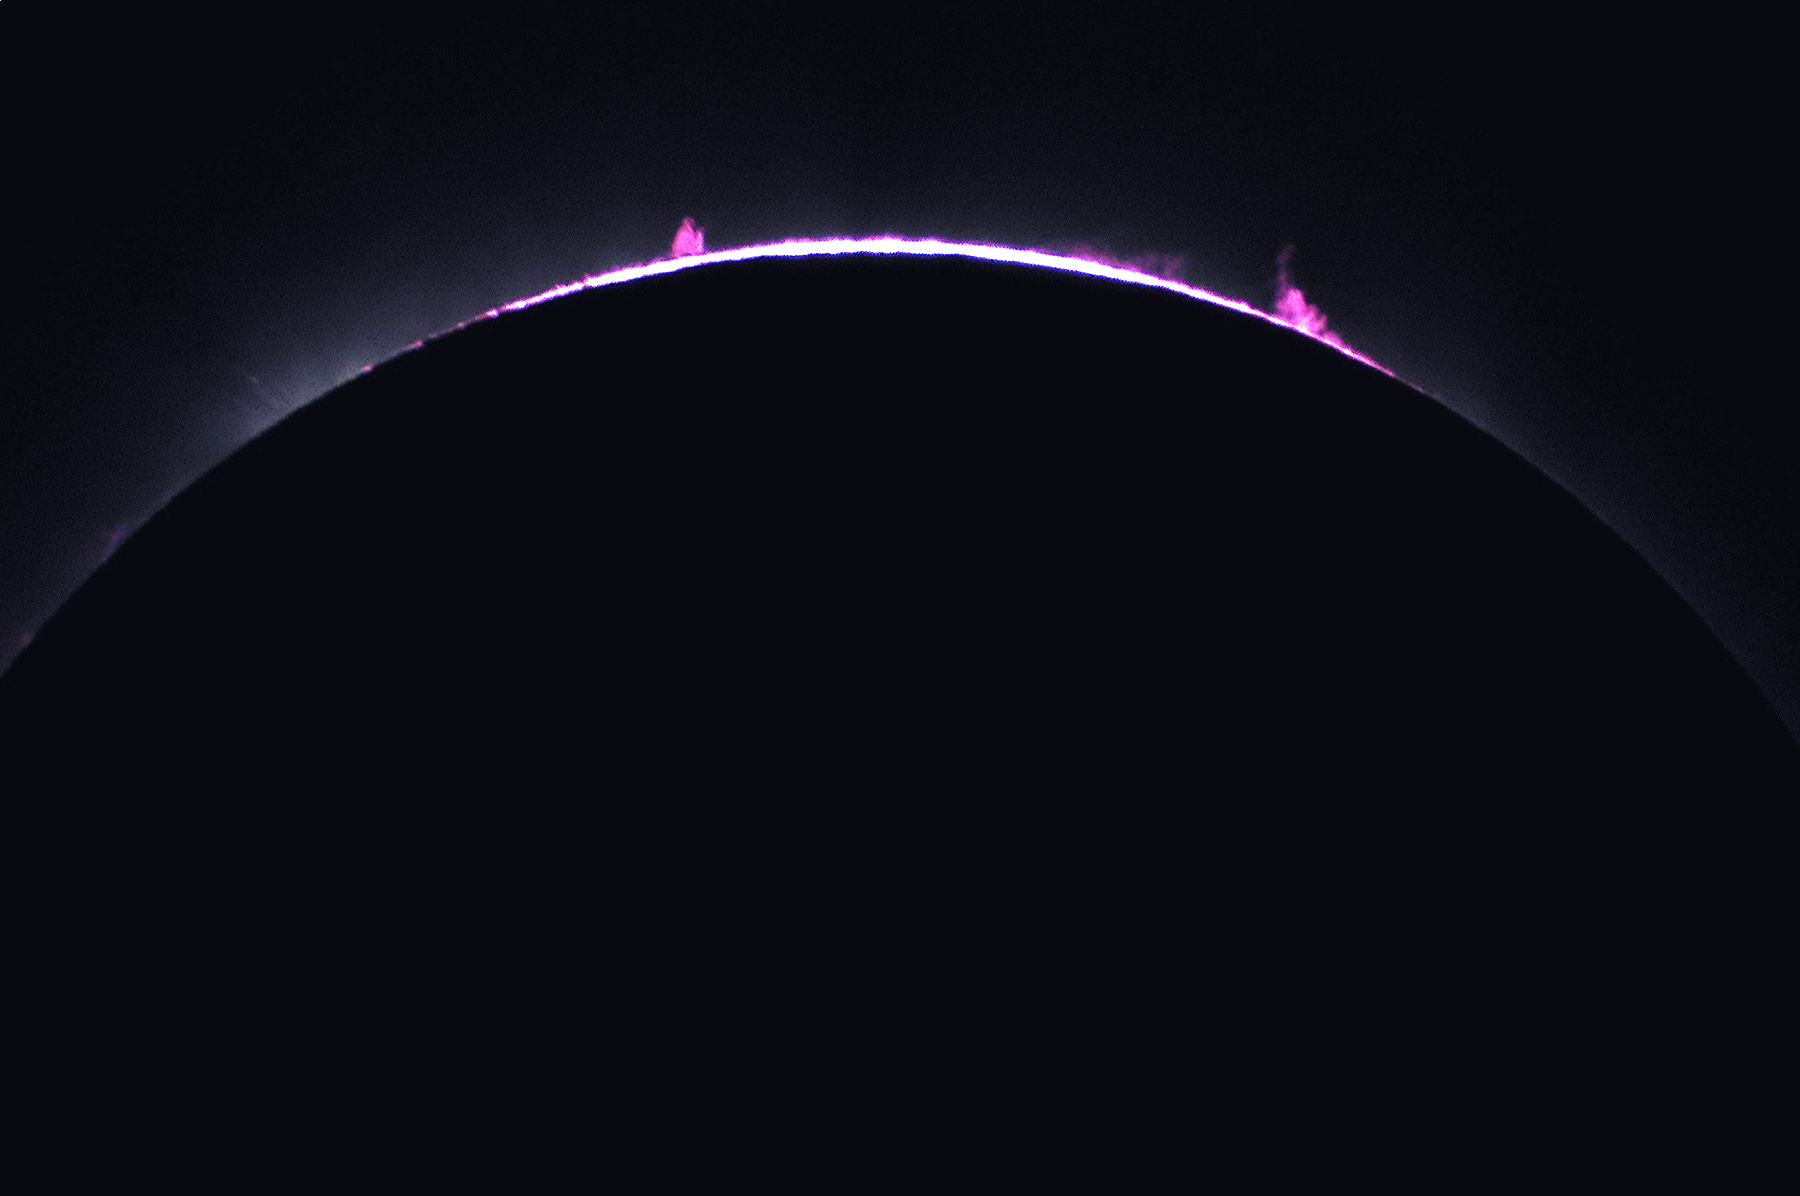 Eclipse 2006 - A72 - Eclipse - Prominences at Start